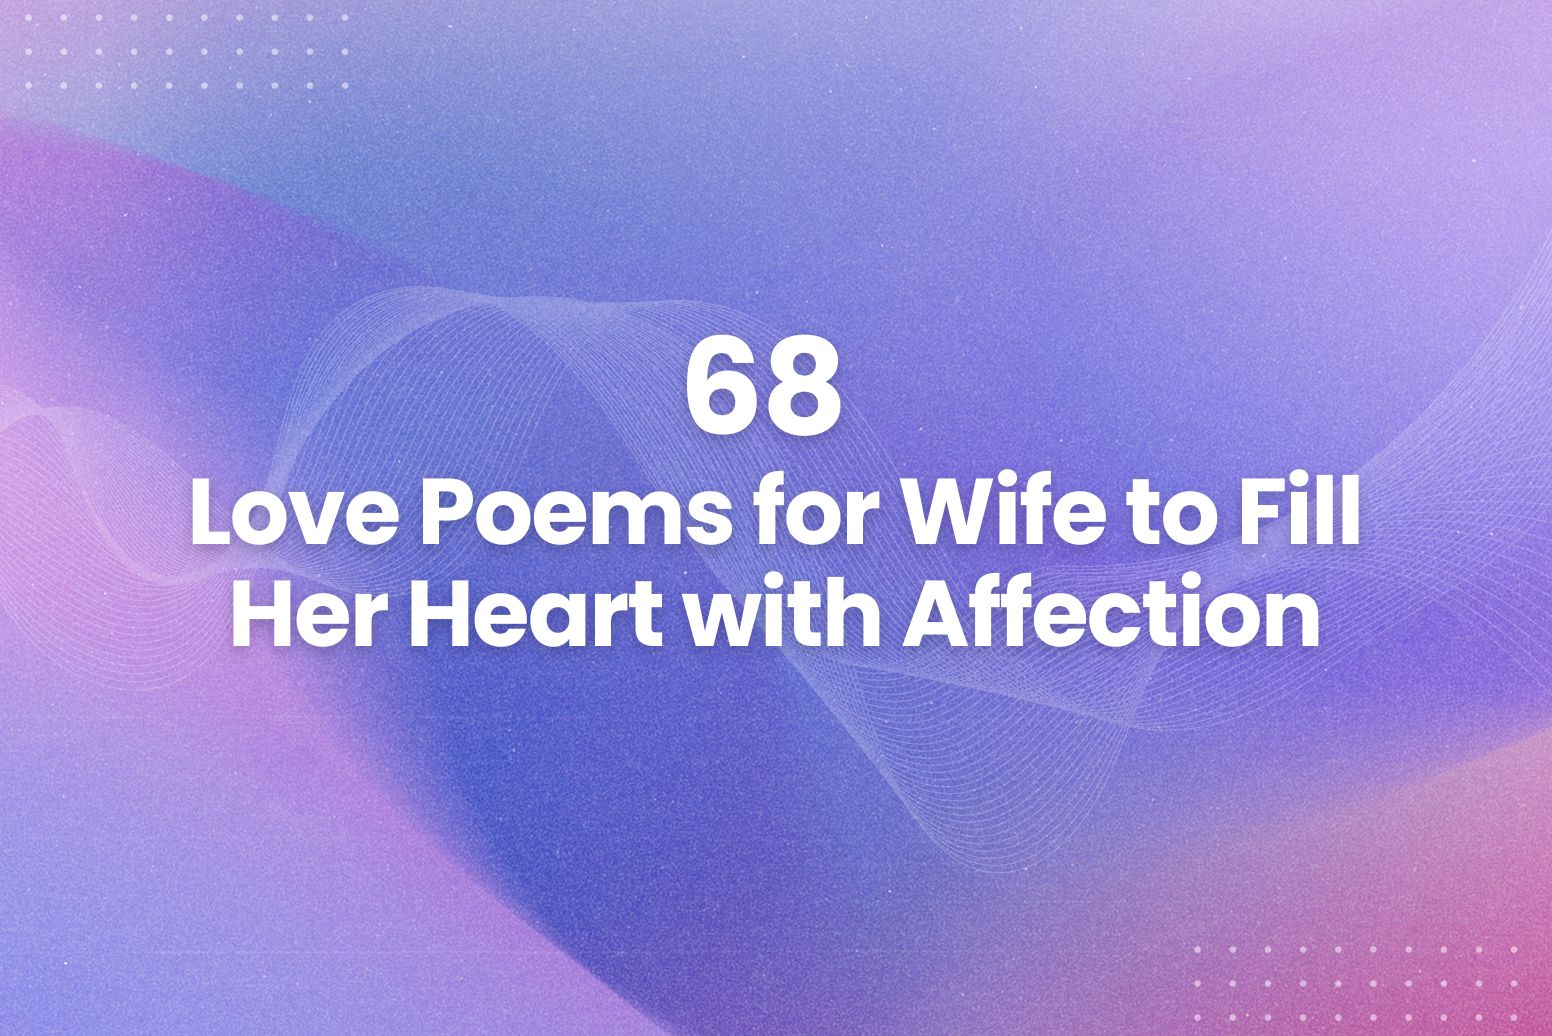 68 Love Poems for Wife to Fill Her Heart with Affection